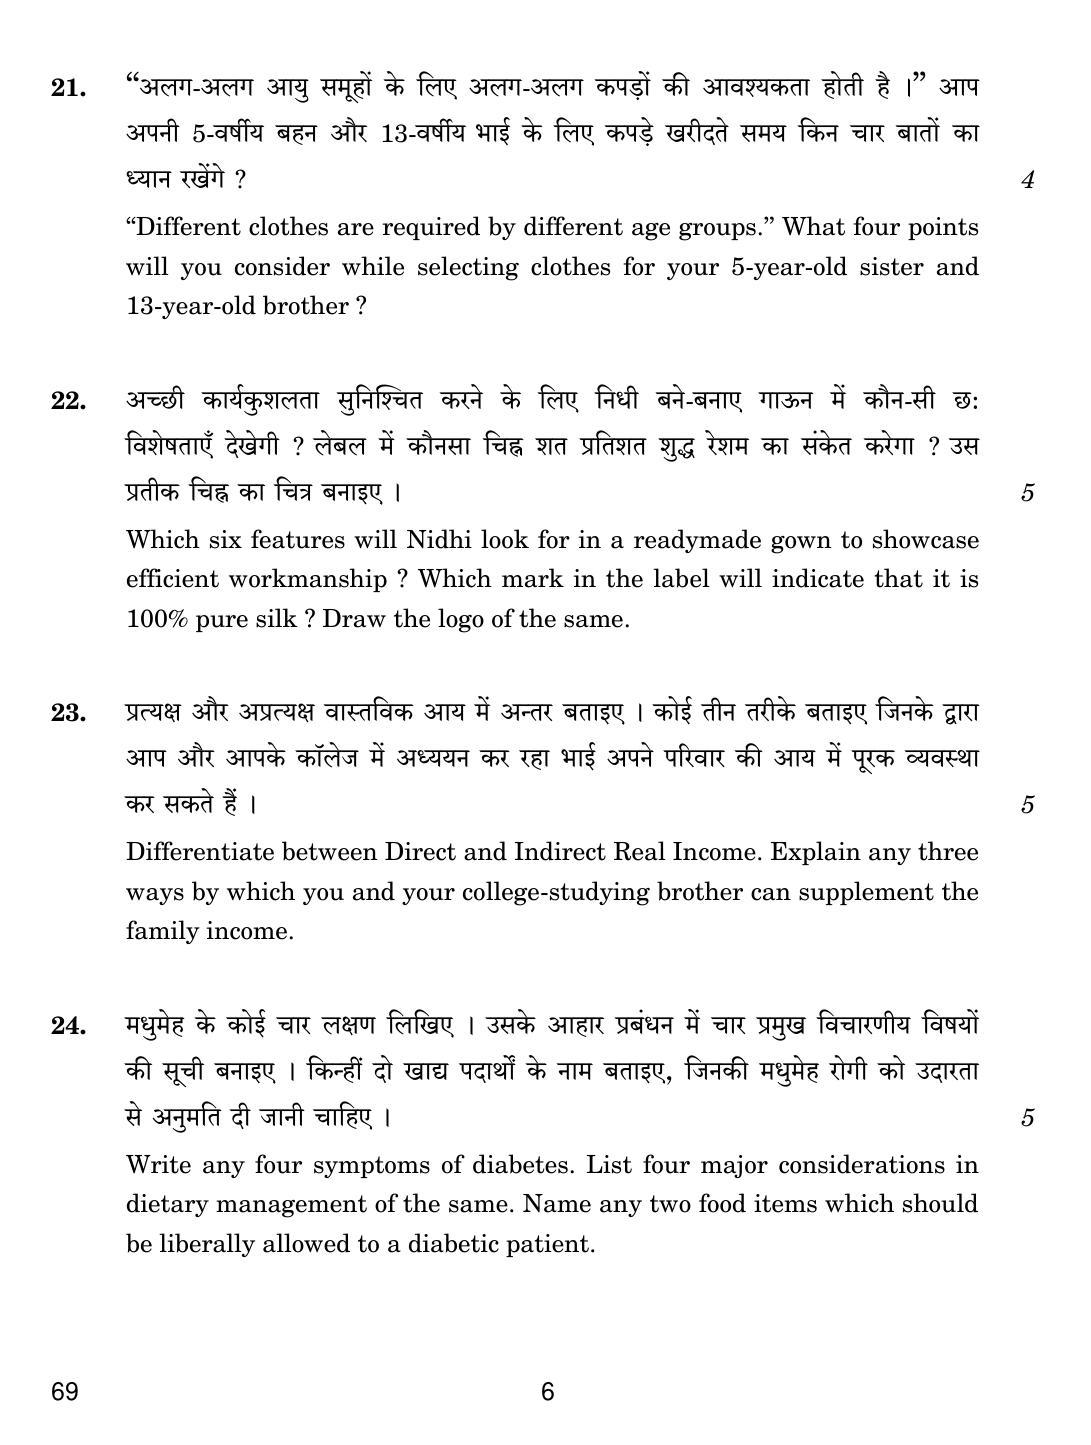 CBSE Class 12 69 HOME SCIENCE 2018 Question Paper - Page 6